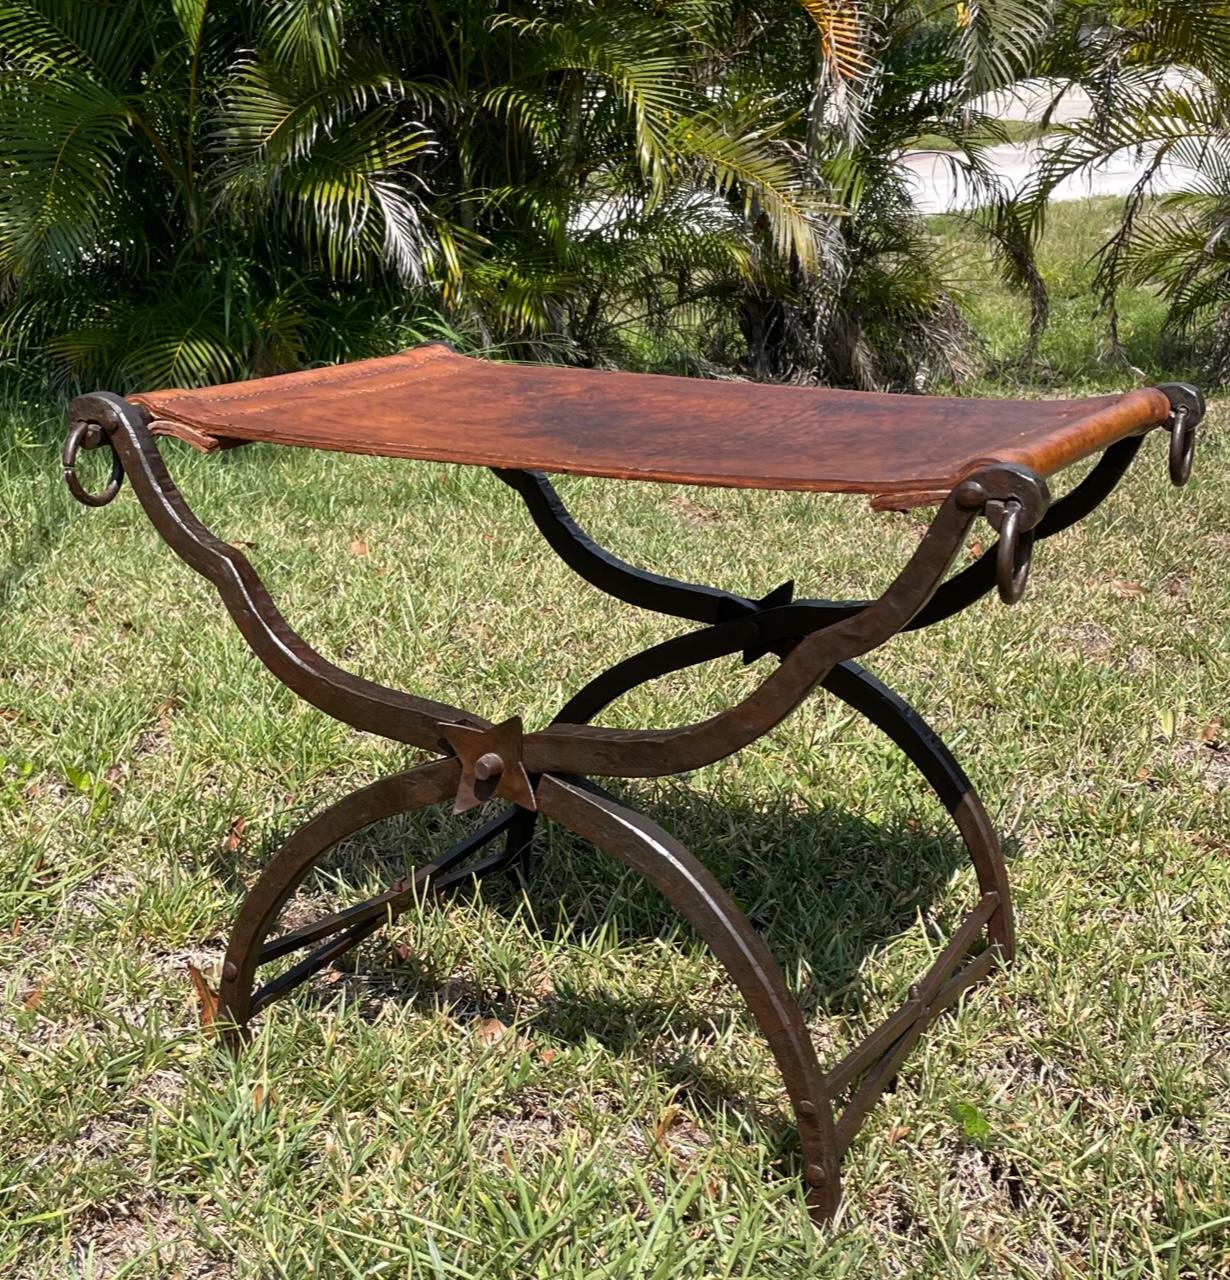 20th Century Arts and Crafts Style Morgan Colt Hand Hammered Wrought Iron Folding Curule Seat